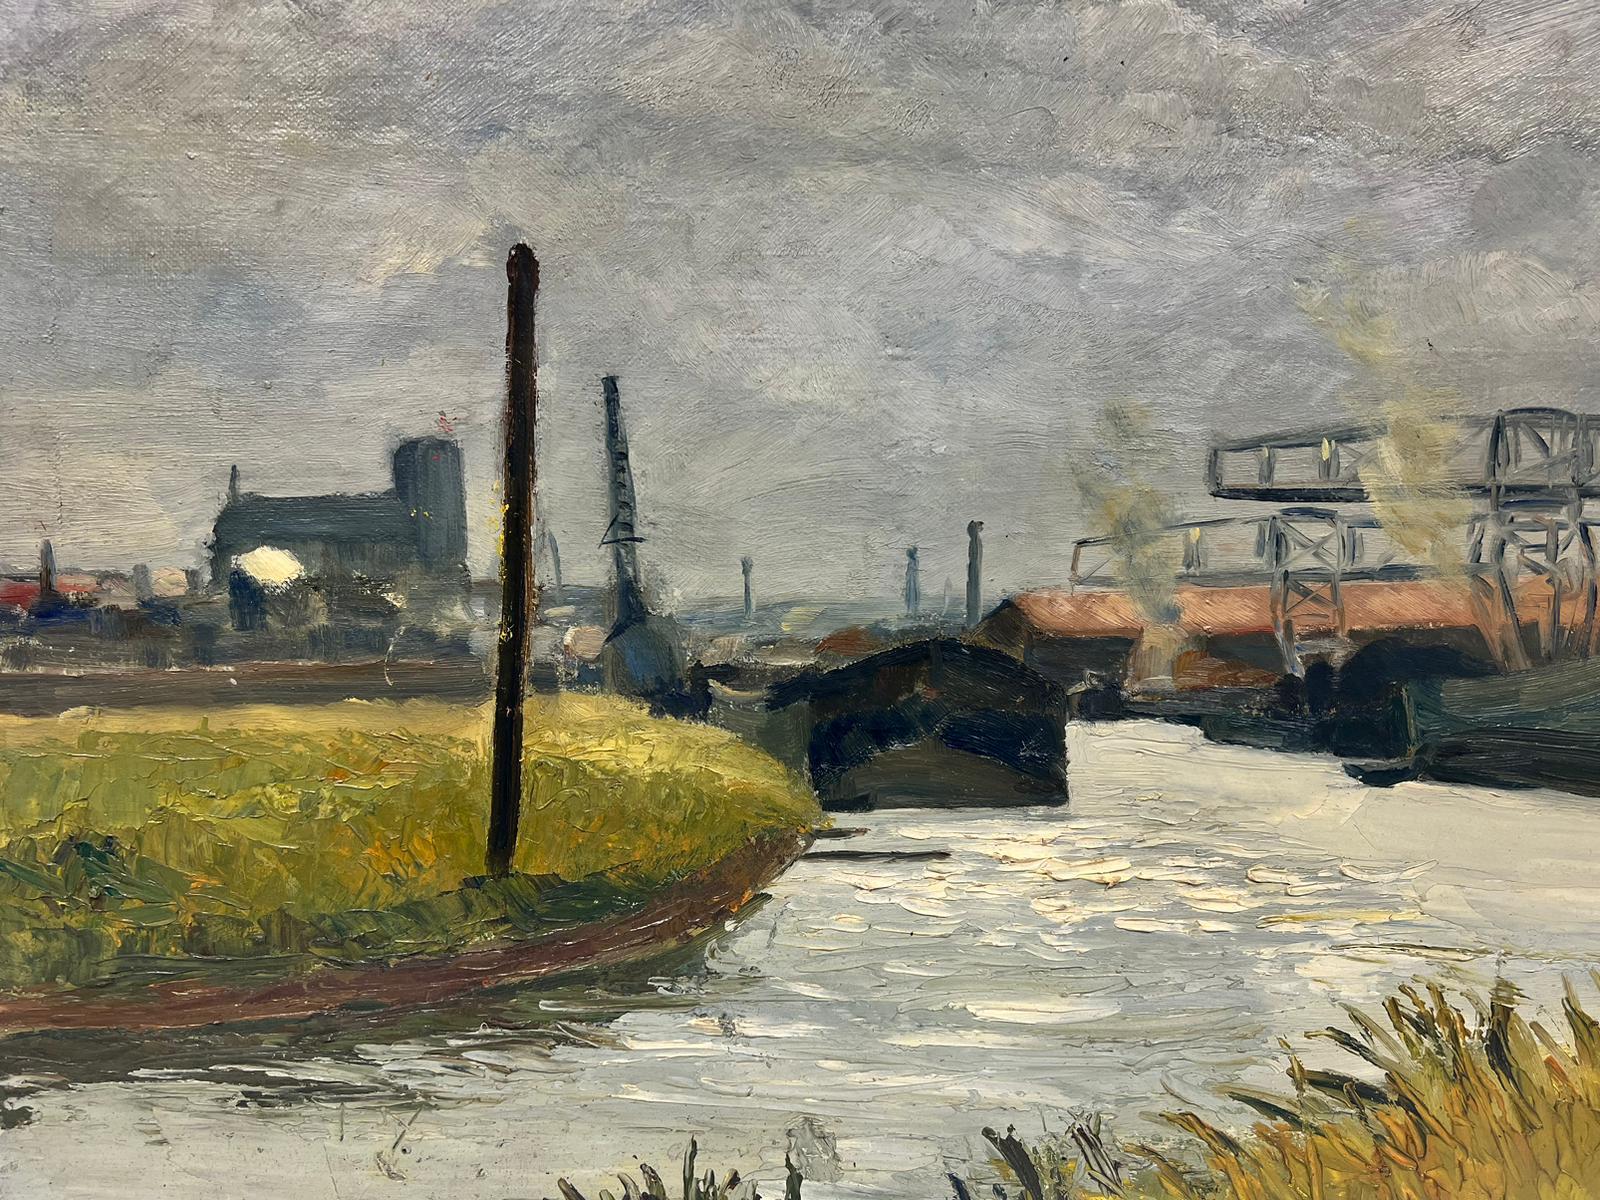 Boat and Factory Cloudy Landscape Post Impressionist Signed Oil  - Post-Impressionist Painting by Josine Vignon